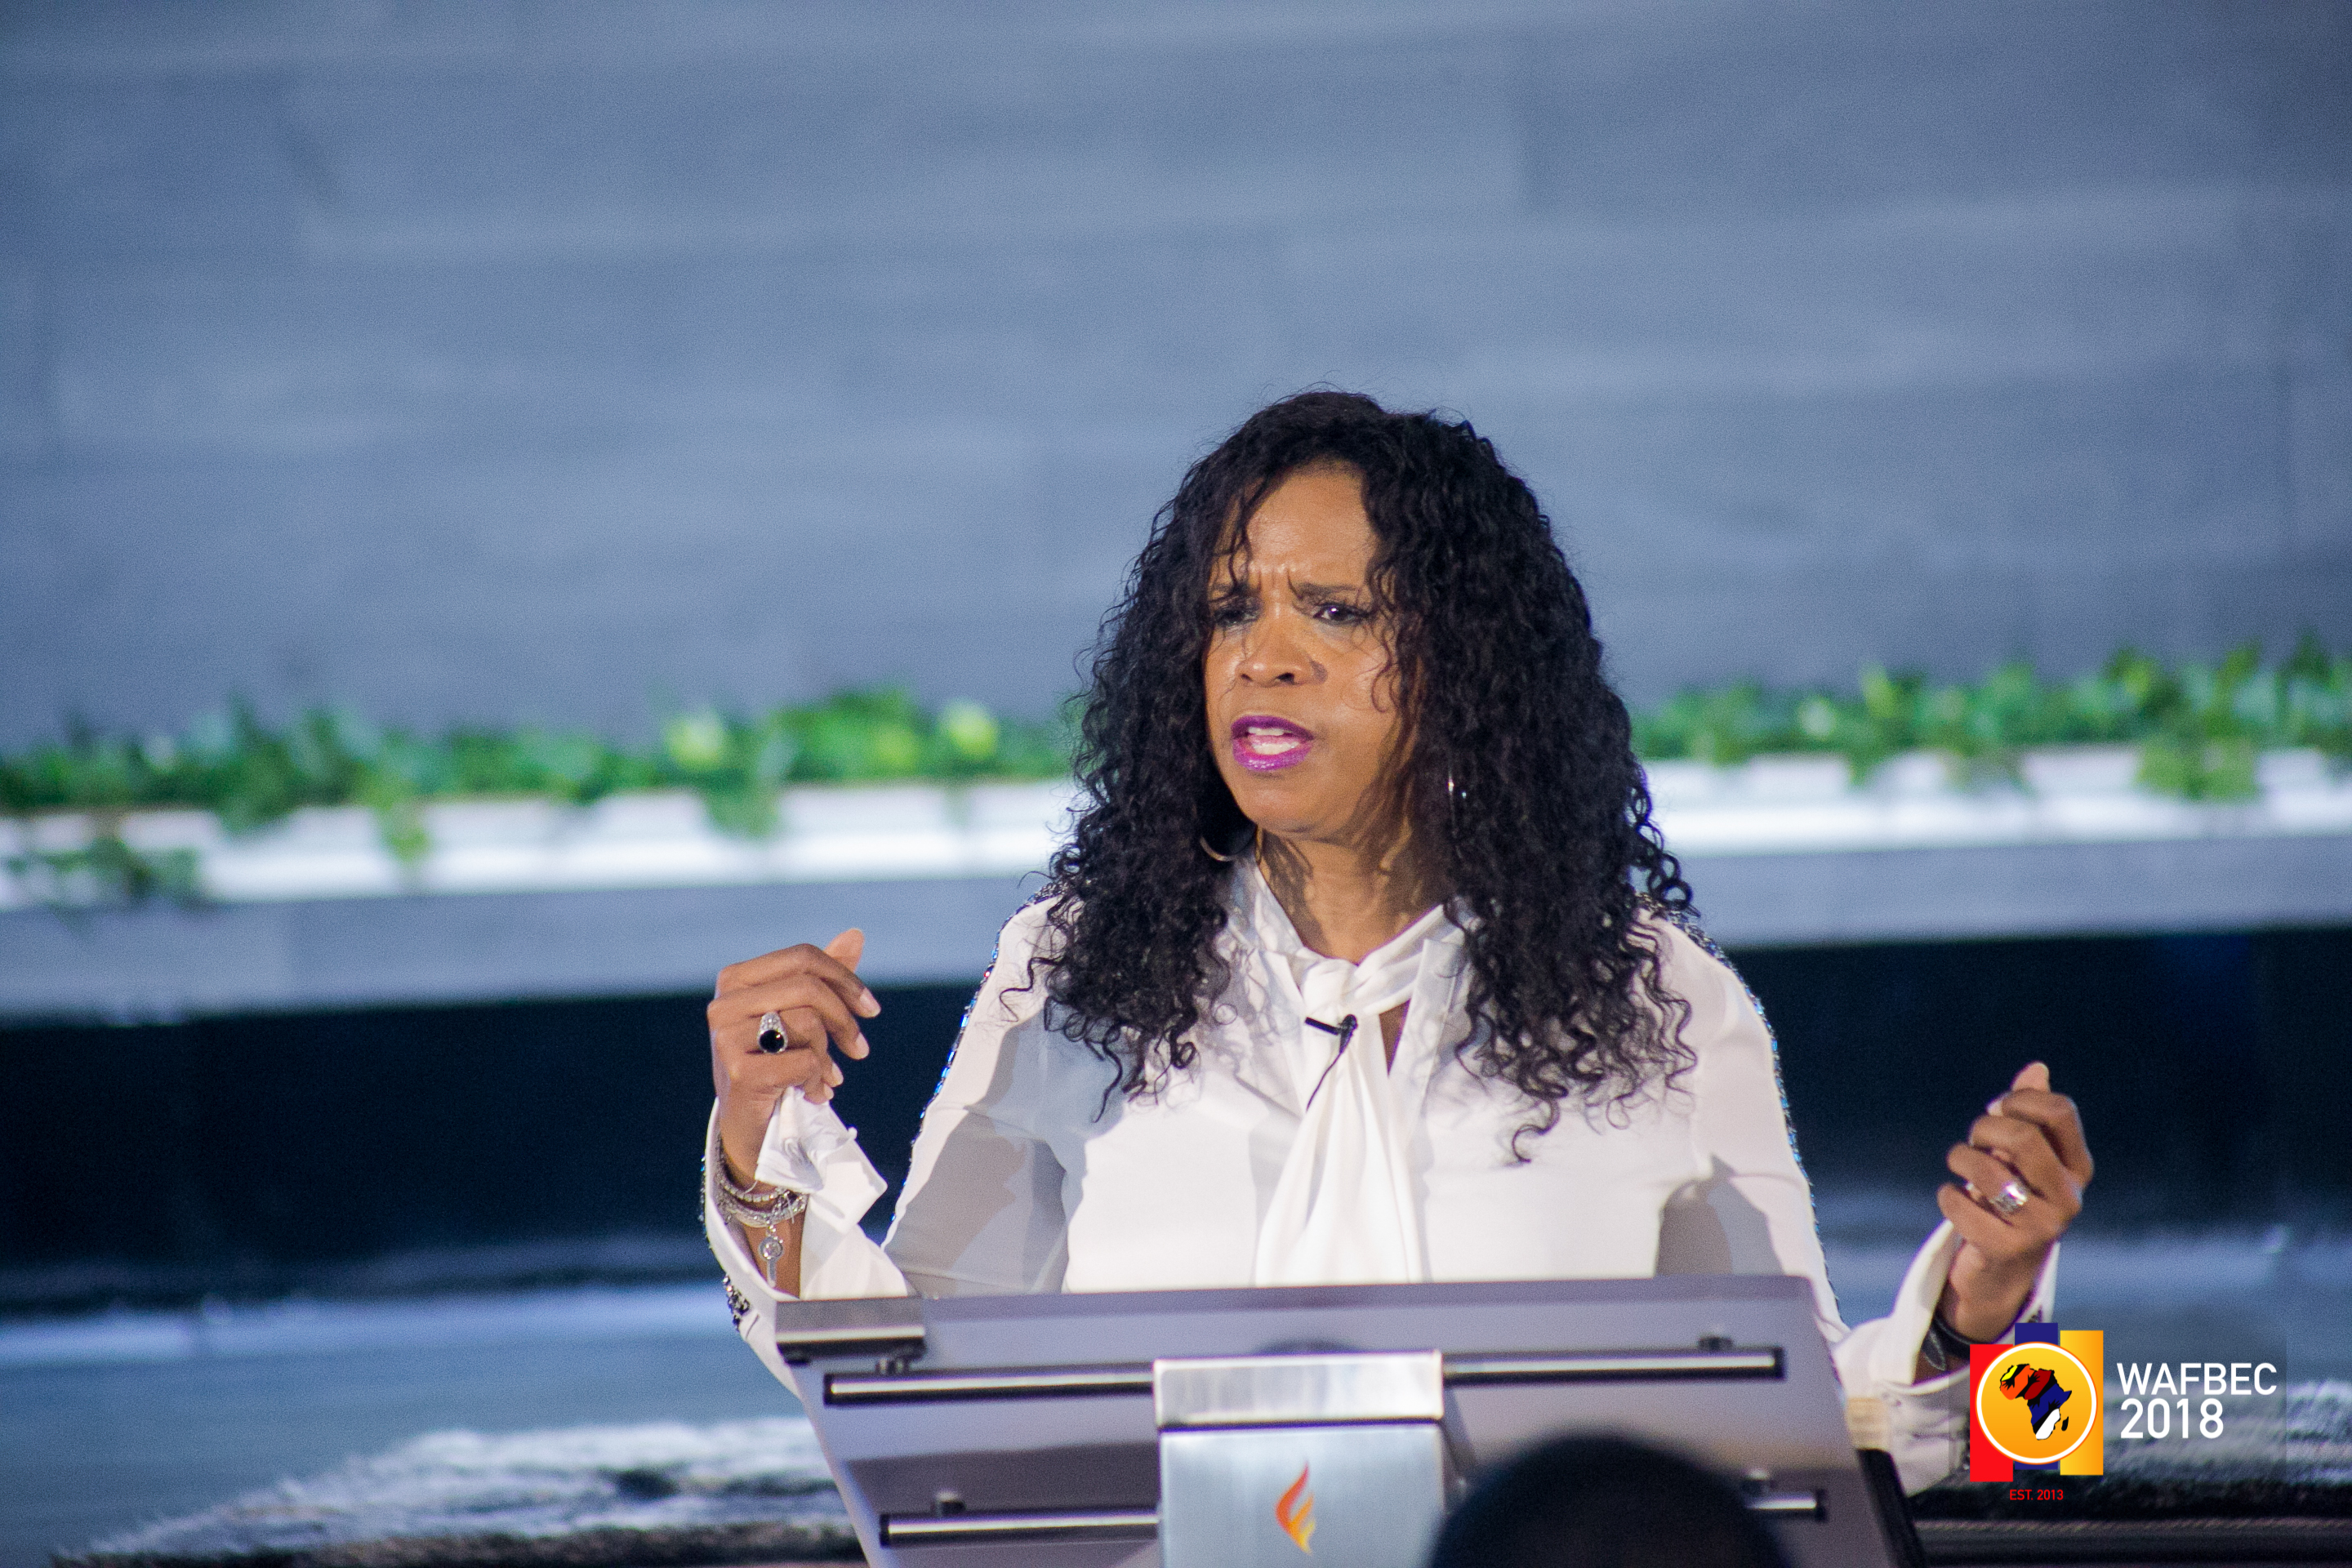 WAFBEC 2018 DAY 6 (MORNING SESSION 3) with Pastor TAFFI DOLLAR